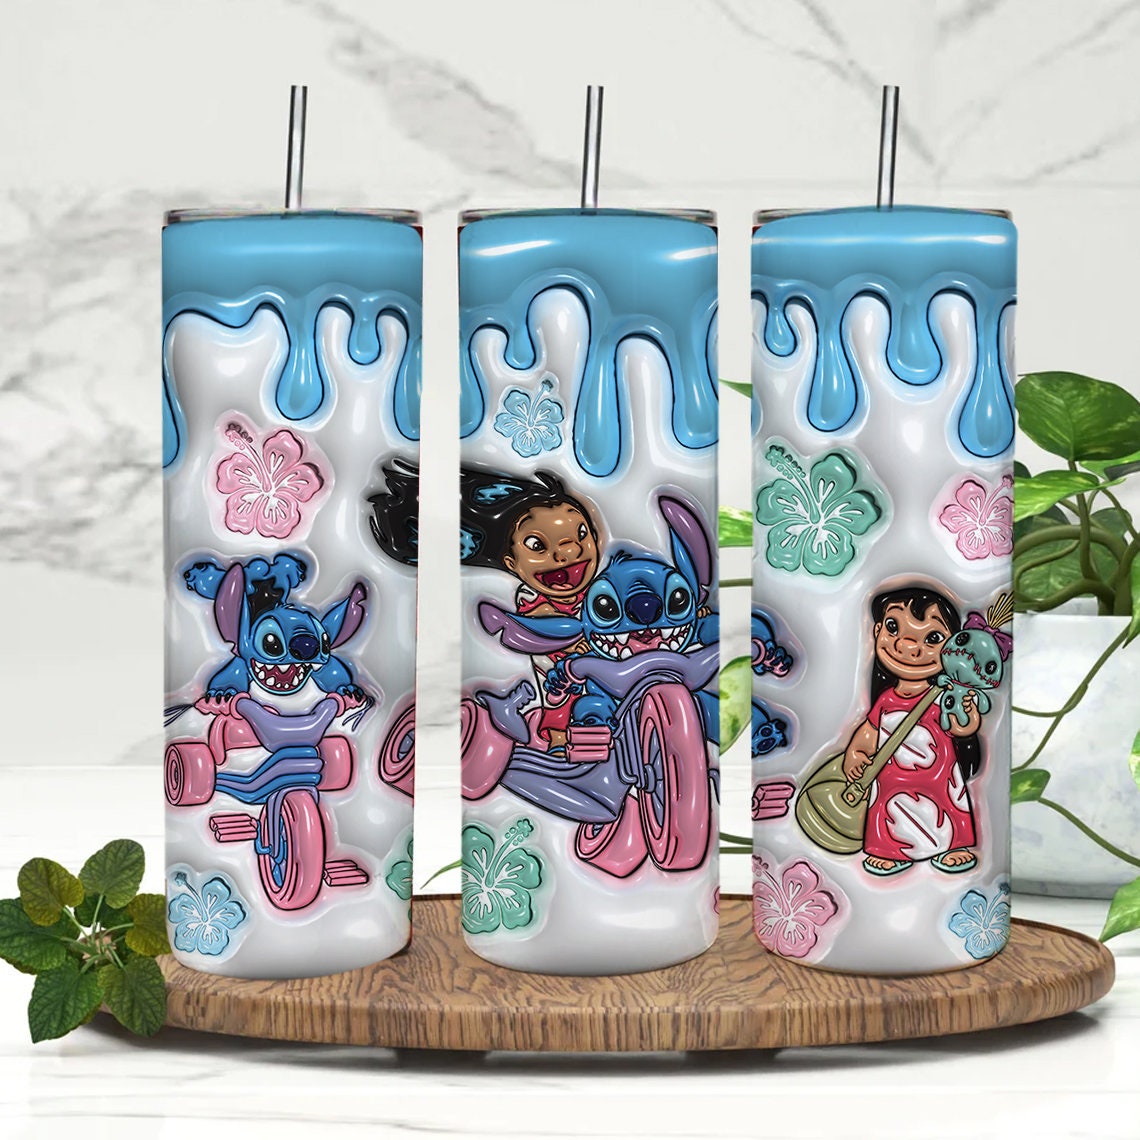 3D Inflated Cartoon Tumbler Wrap, Inflated Floral Tumbler Wrap, Cartoon Tumbler 20oz Skinny Tumbler Png, Full Tumbler Wrap, Cartoon Png - VartDigitals